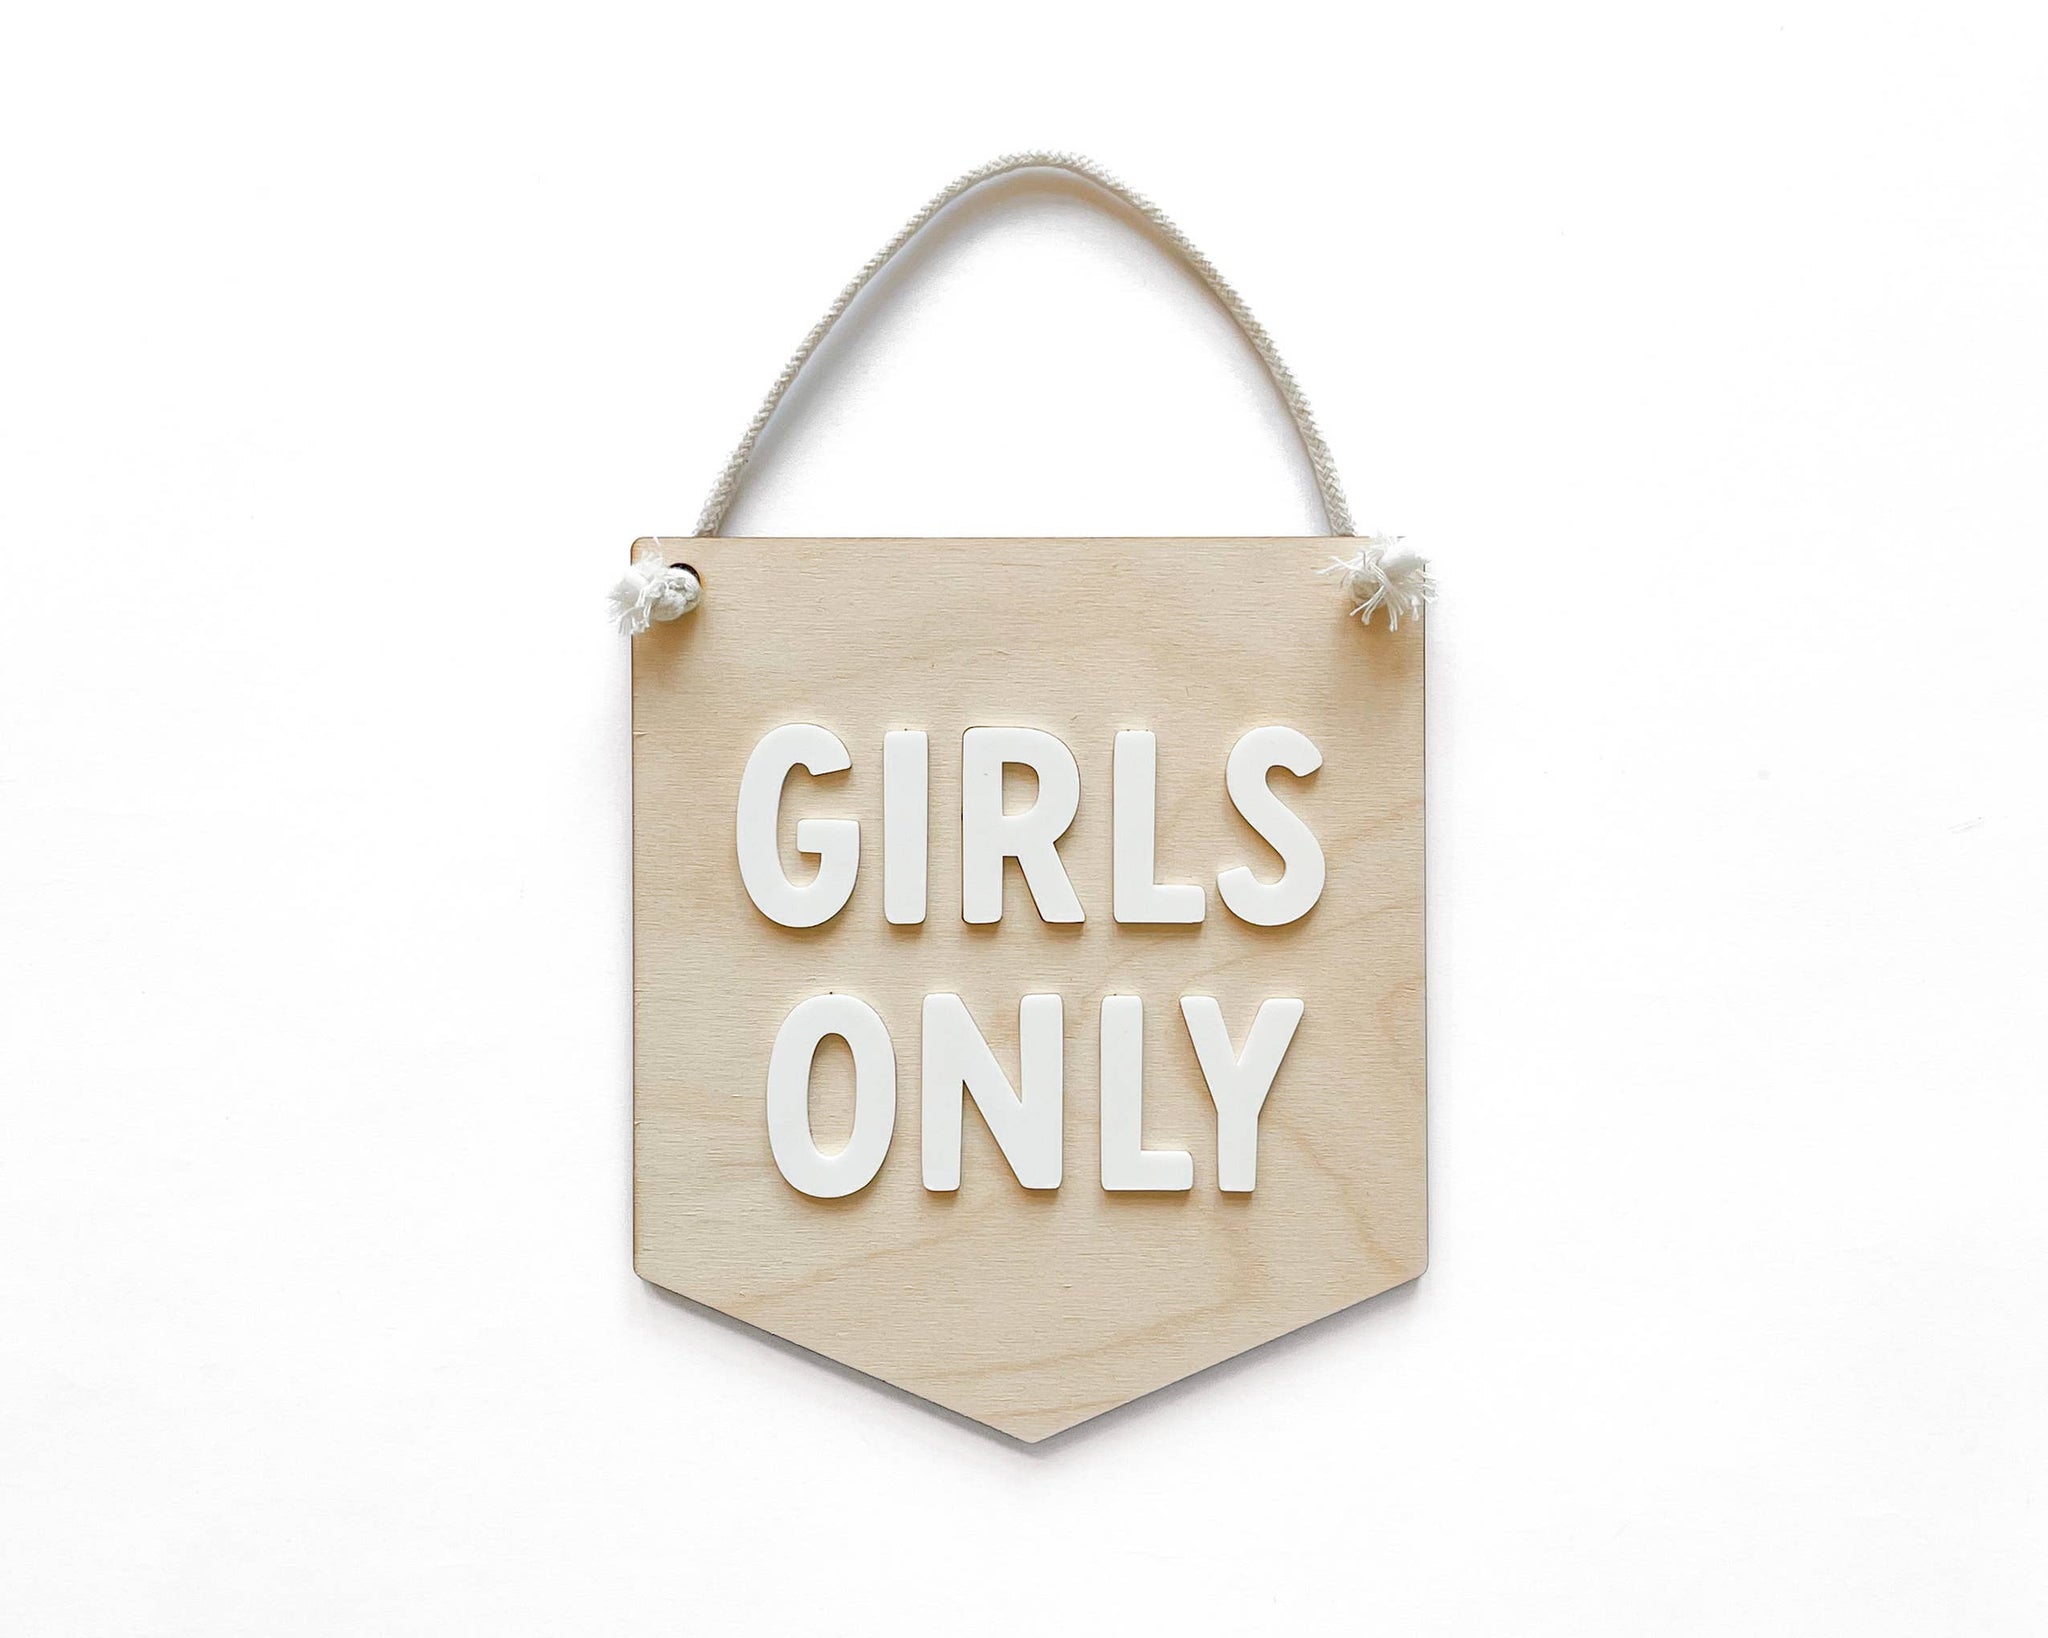 Girls Only Sign